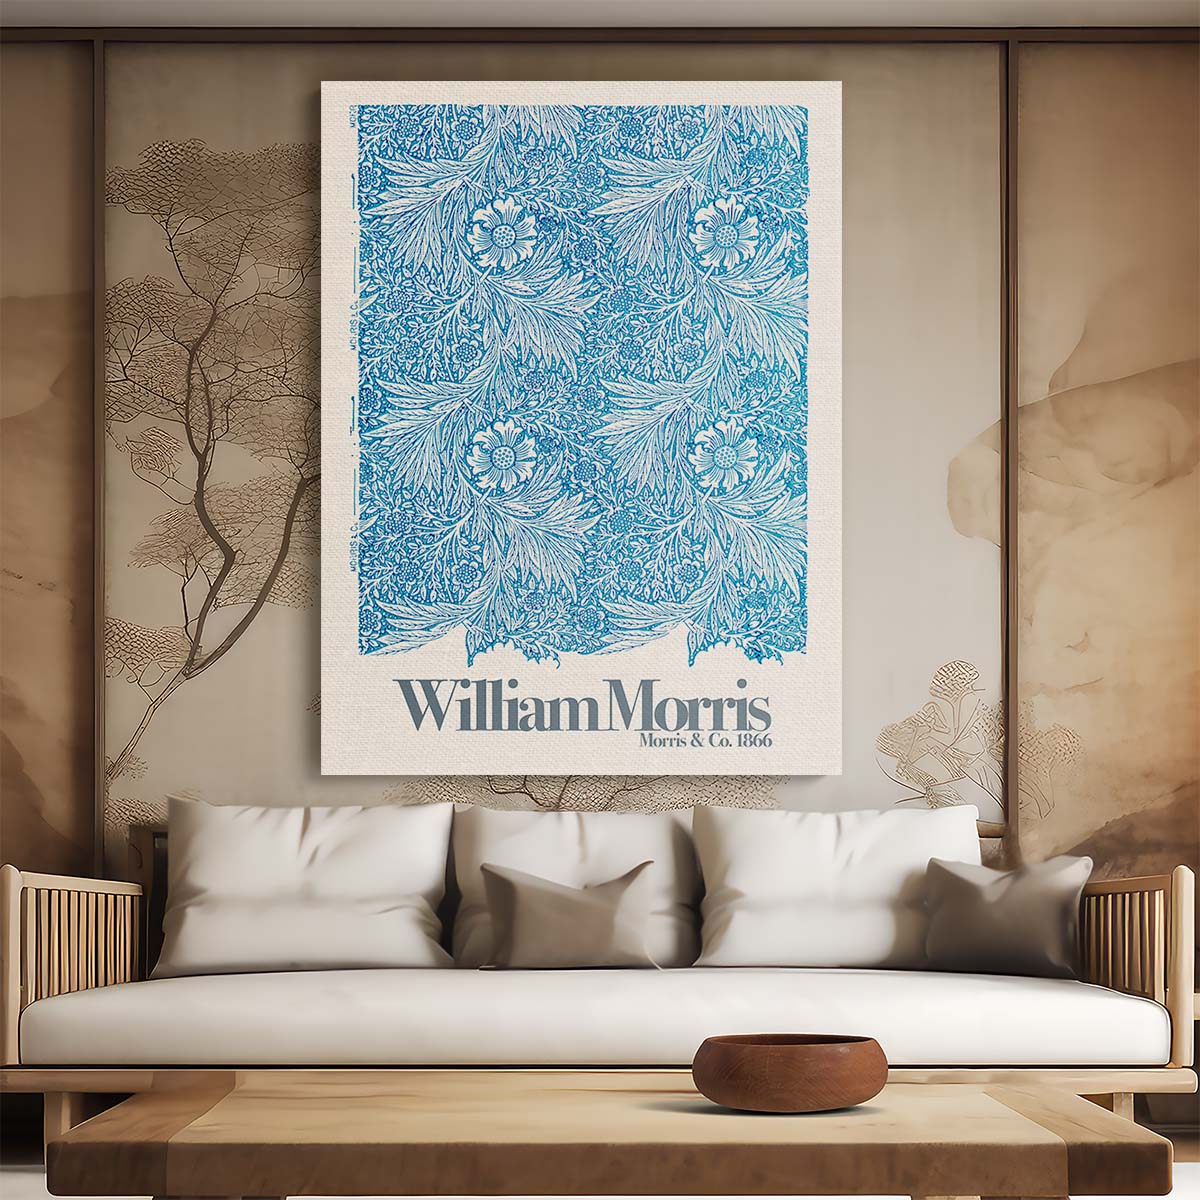 William Morris Marigold Floral Typography Illustration Poster by Luxuriance Designs, made in USA